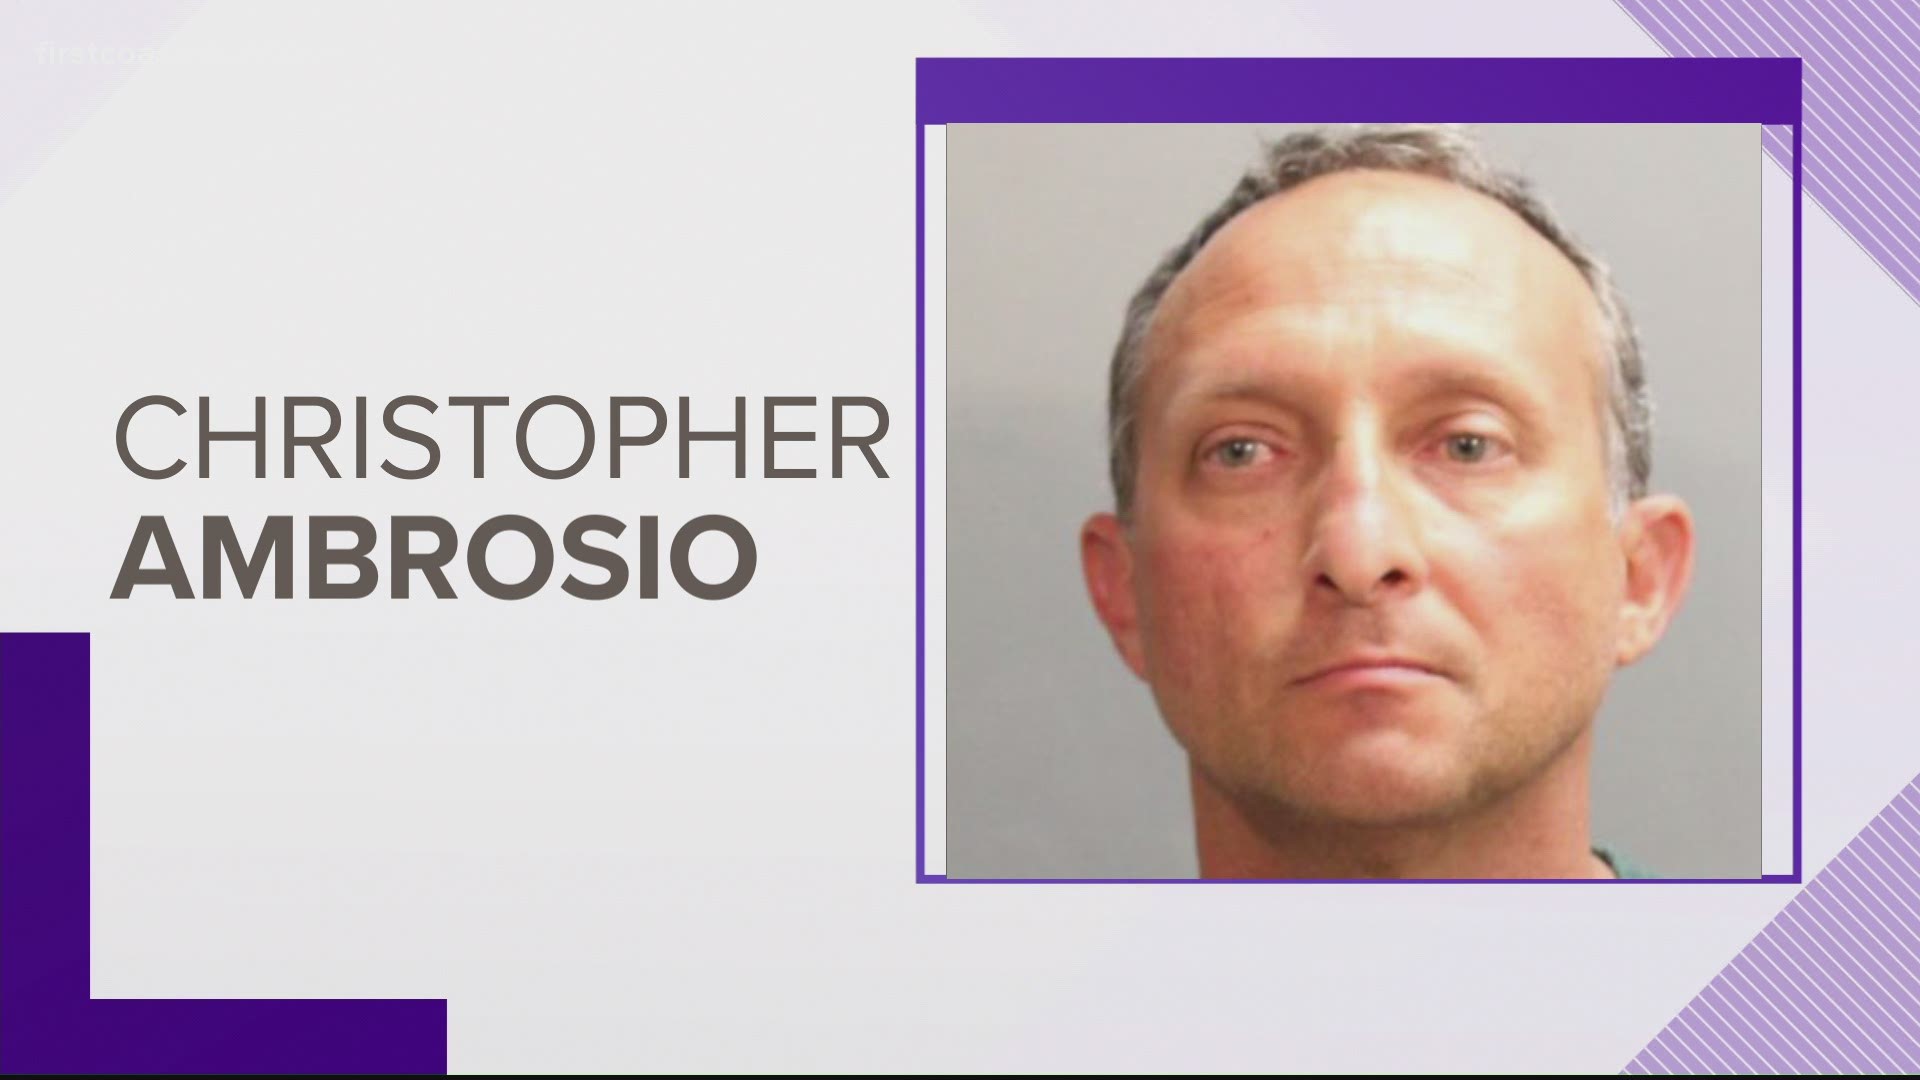 Christopher Ambrosio, 48, is facing charges for lewd/lascivious molestation on a victim over the age of 12, but less than 16.